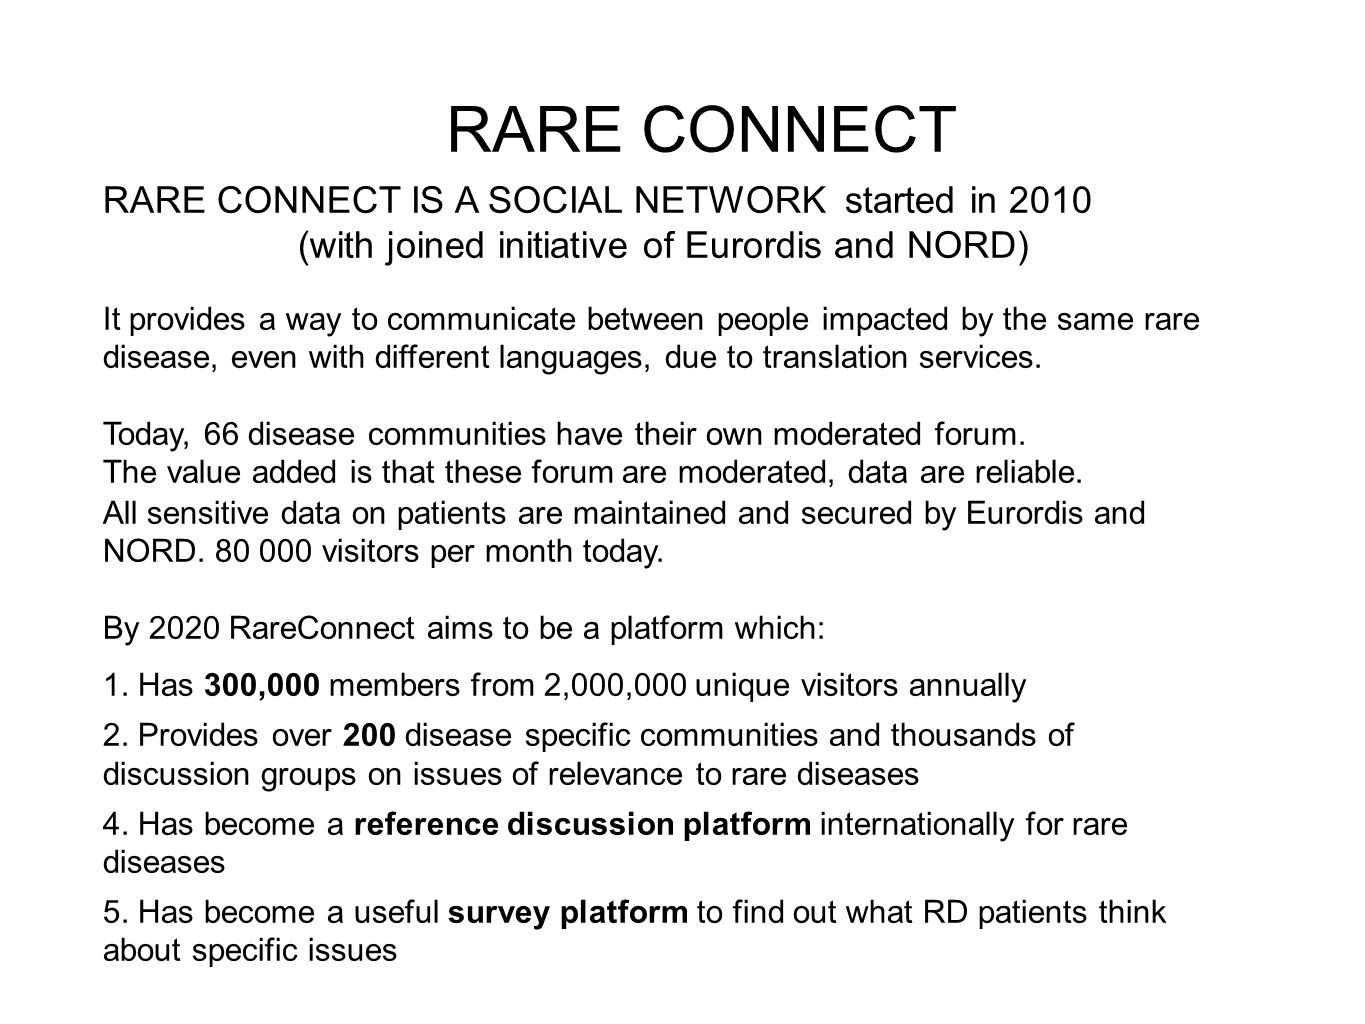 RARE CONNECT RARE CONNECT IS A SOCIAL NETWORK started in 2010 (with joined initiative of Eurordis and NORD) It provides a way to communicate between people impacted by the same rare disease, even with different languages, due to translation services.